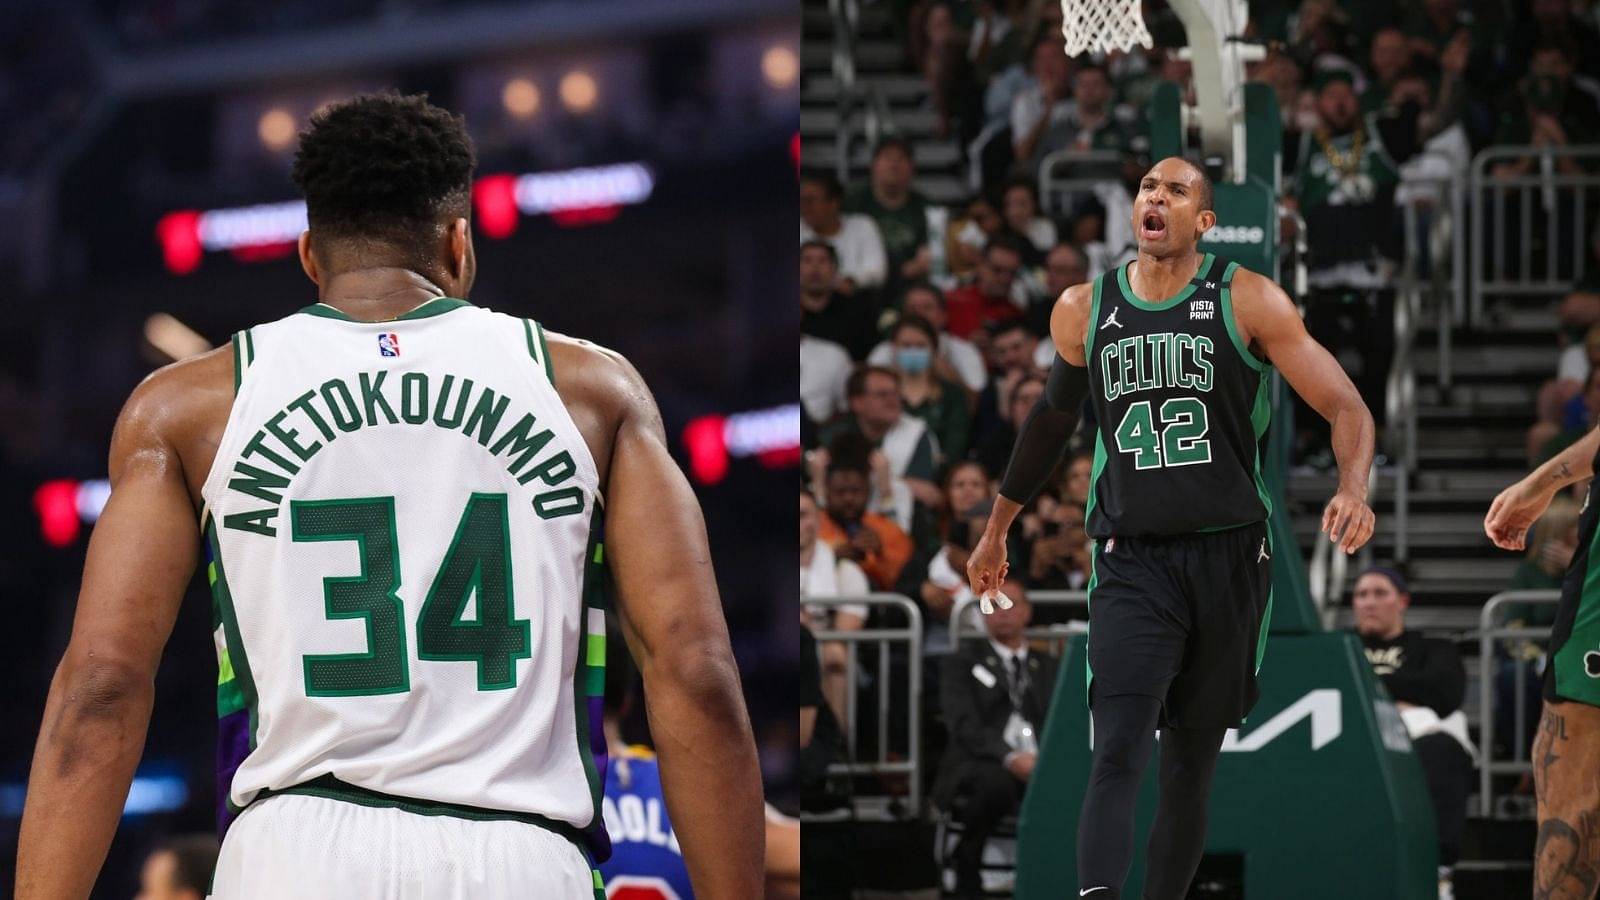 "Holy sh*t AL HORFORD just ENDED Giannis Antetokounmpo": Dominican big man scores playoff career high 30-points to get Celtics at level terms with the Bucks, NBA Twitter is impressed